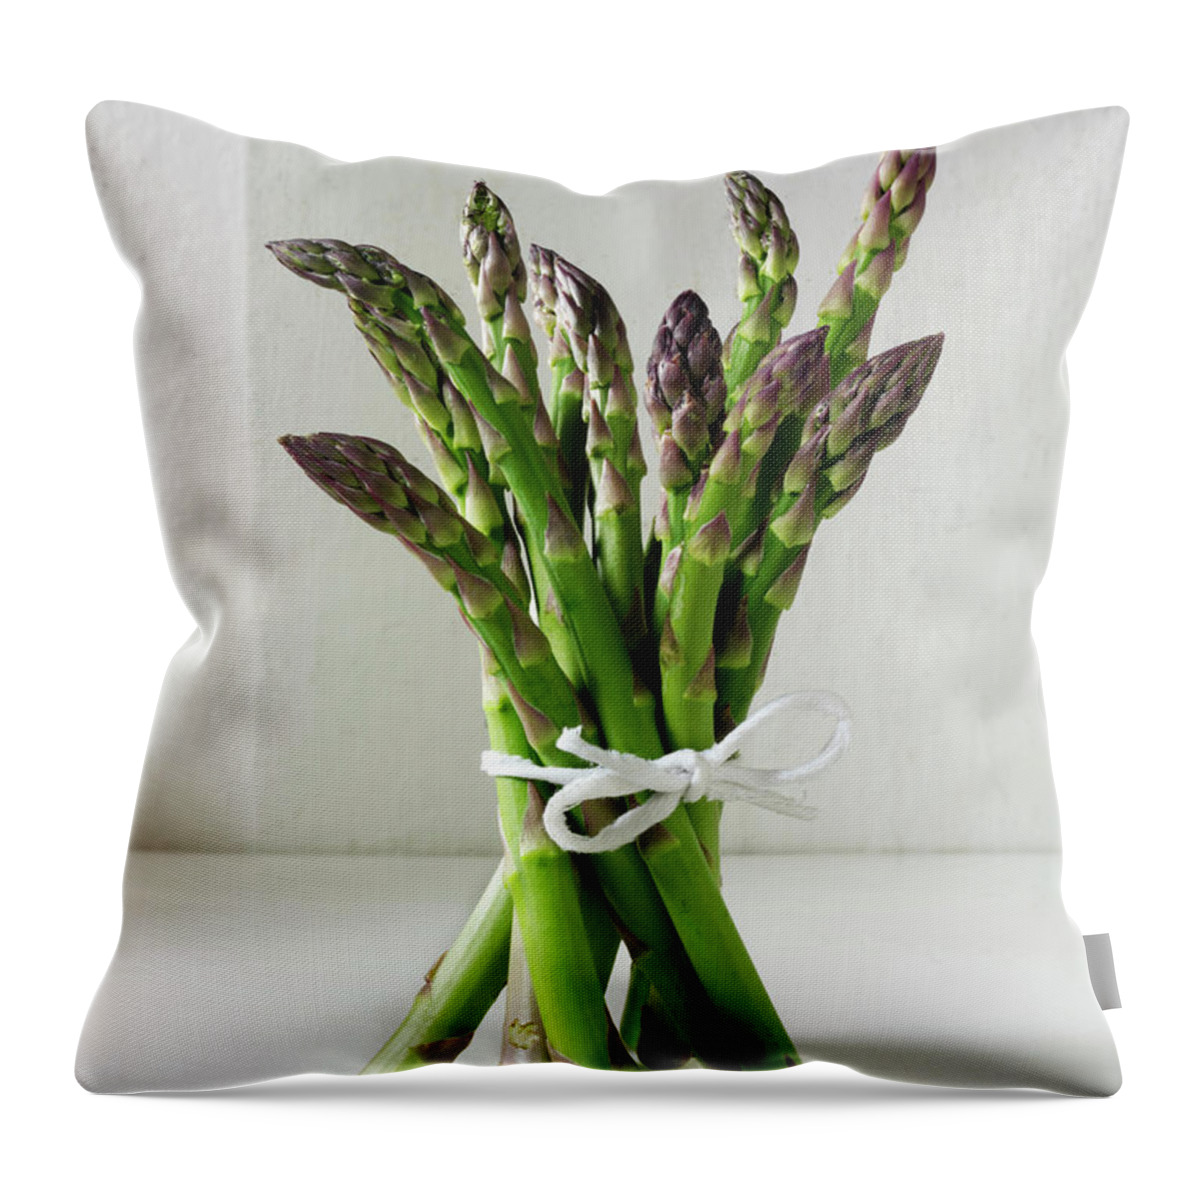 Bunch Throw Pillow featuring the photograph Bunch Of Fresh English Asparagus Spears #1 by Paul Williams - Funkystock